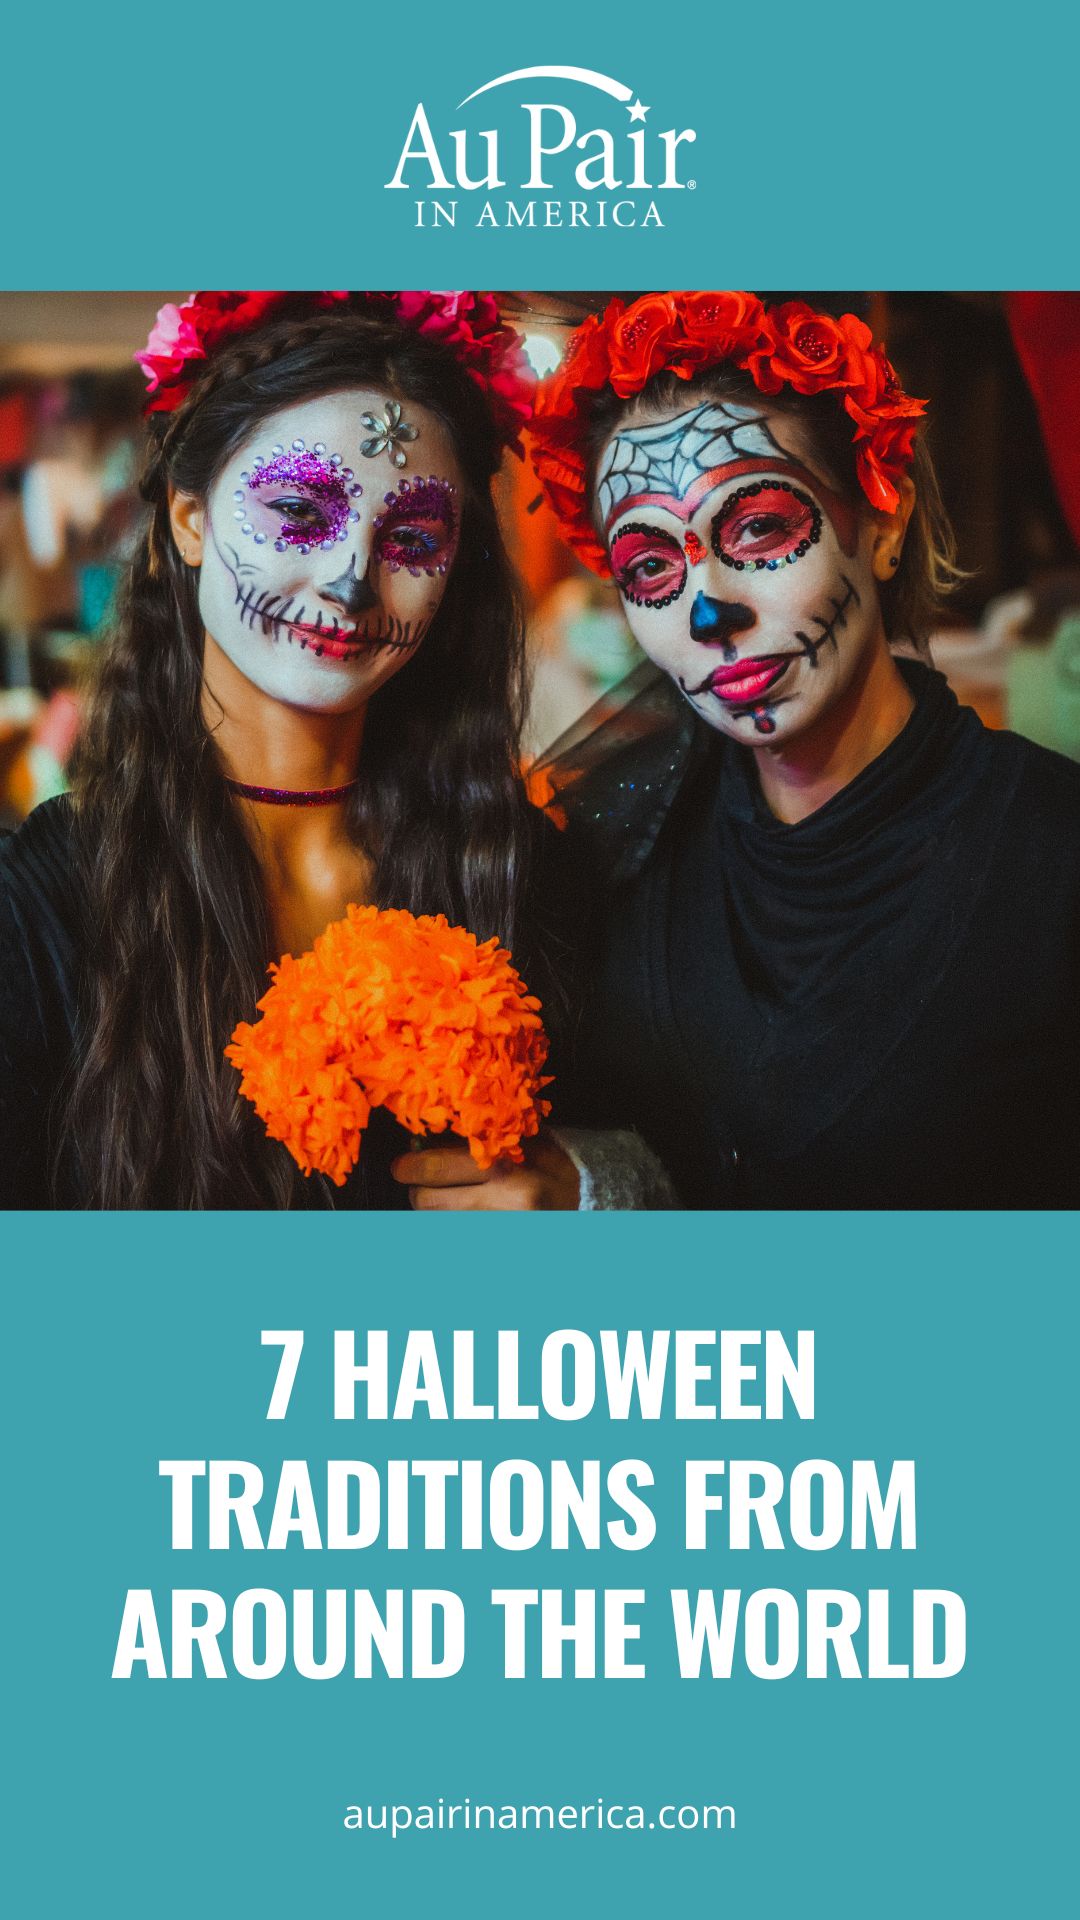 Pin image: Two women with faces painted for Día de los Muertos with text that says "7 Halloween traditions from around the world"